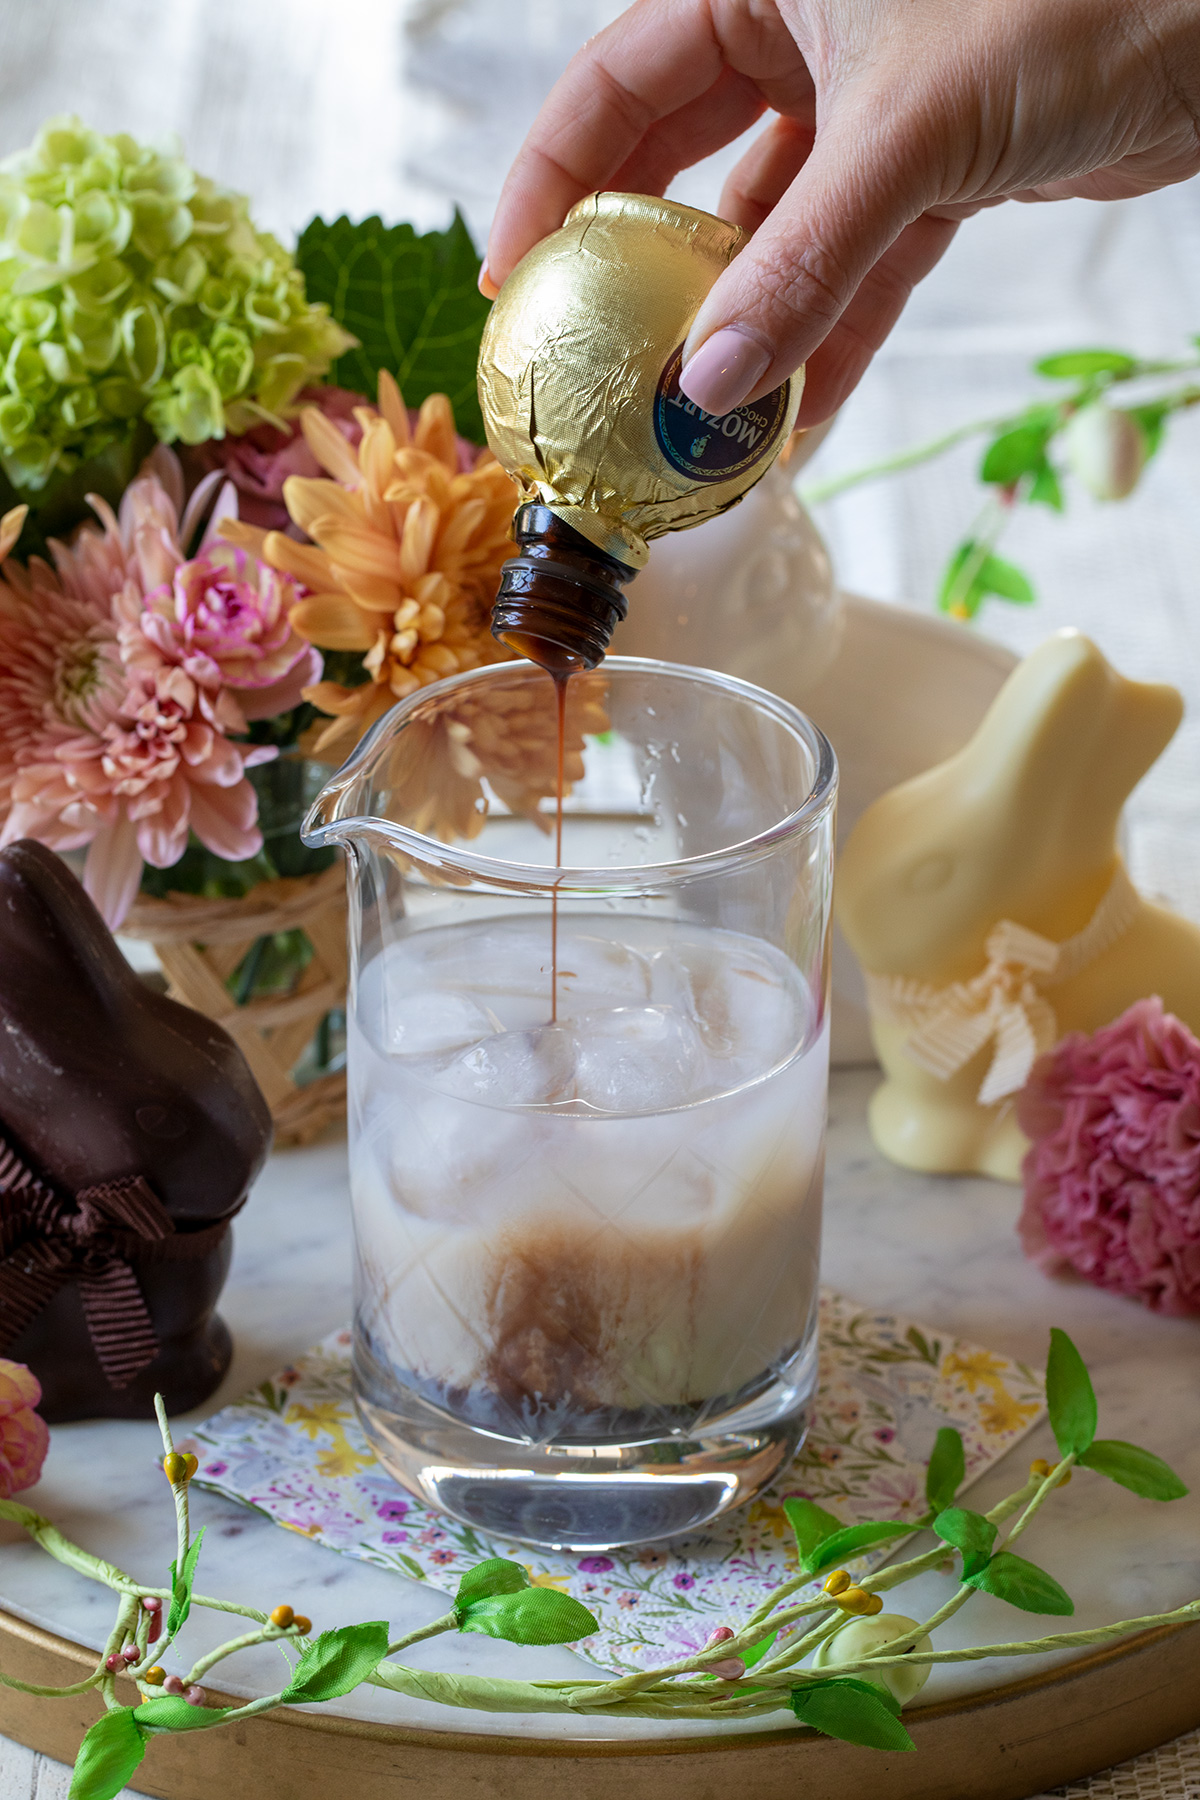 Chocolate Bunny Martini Easter Cocktail Recipe